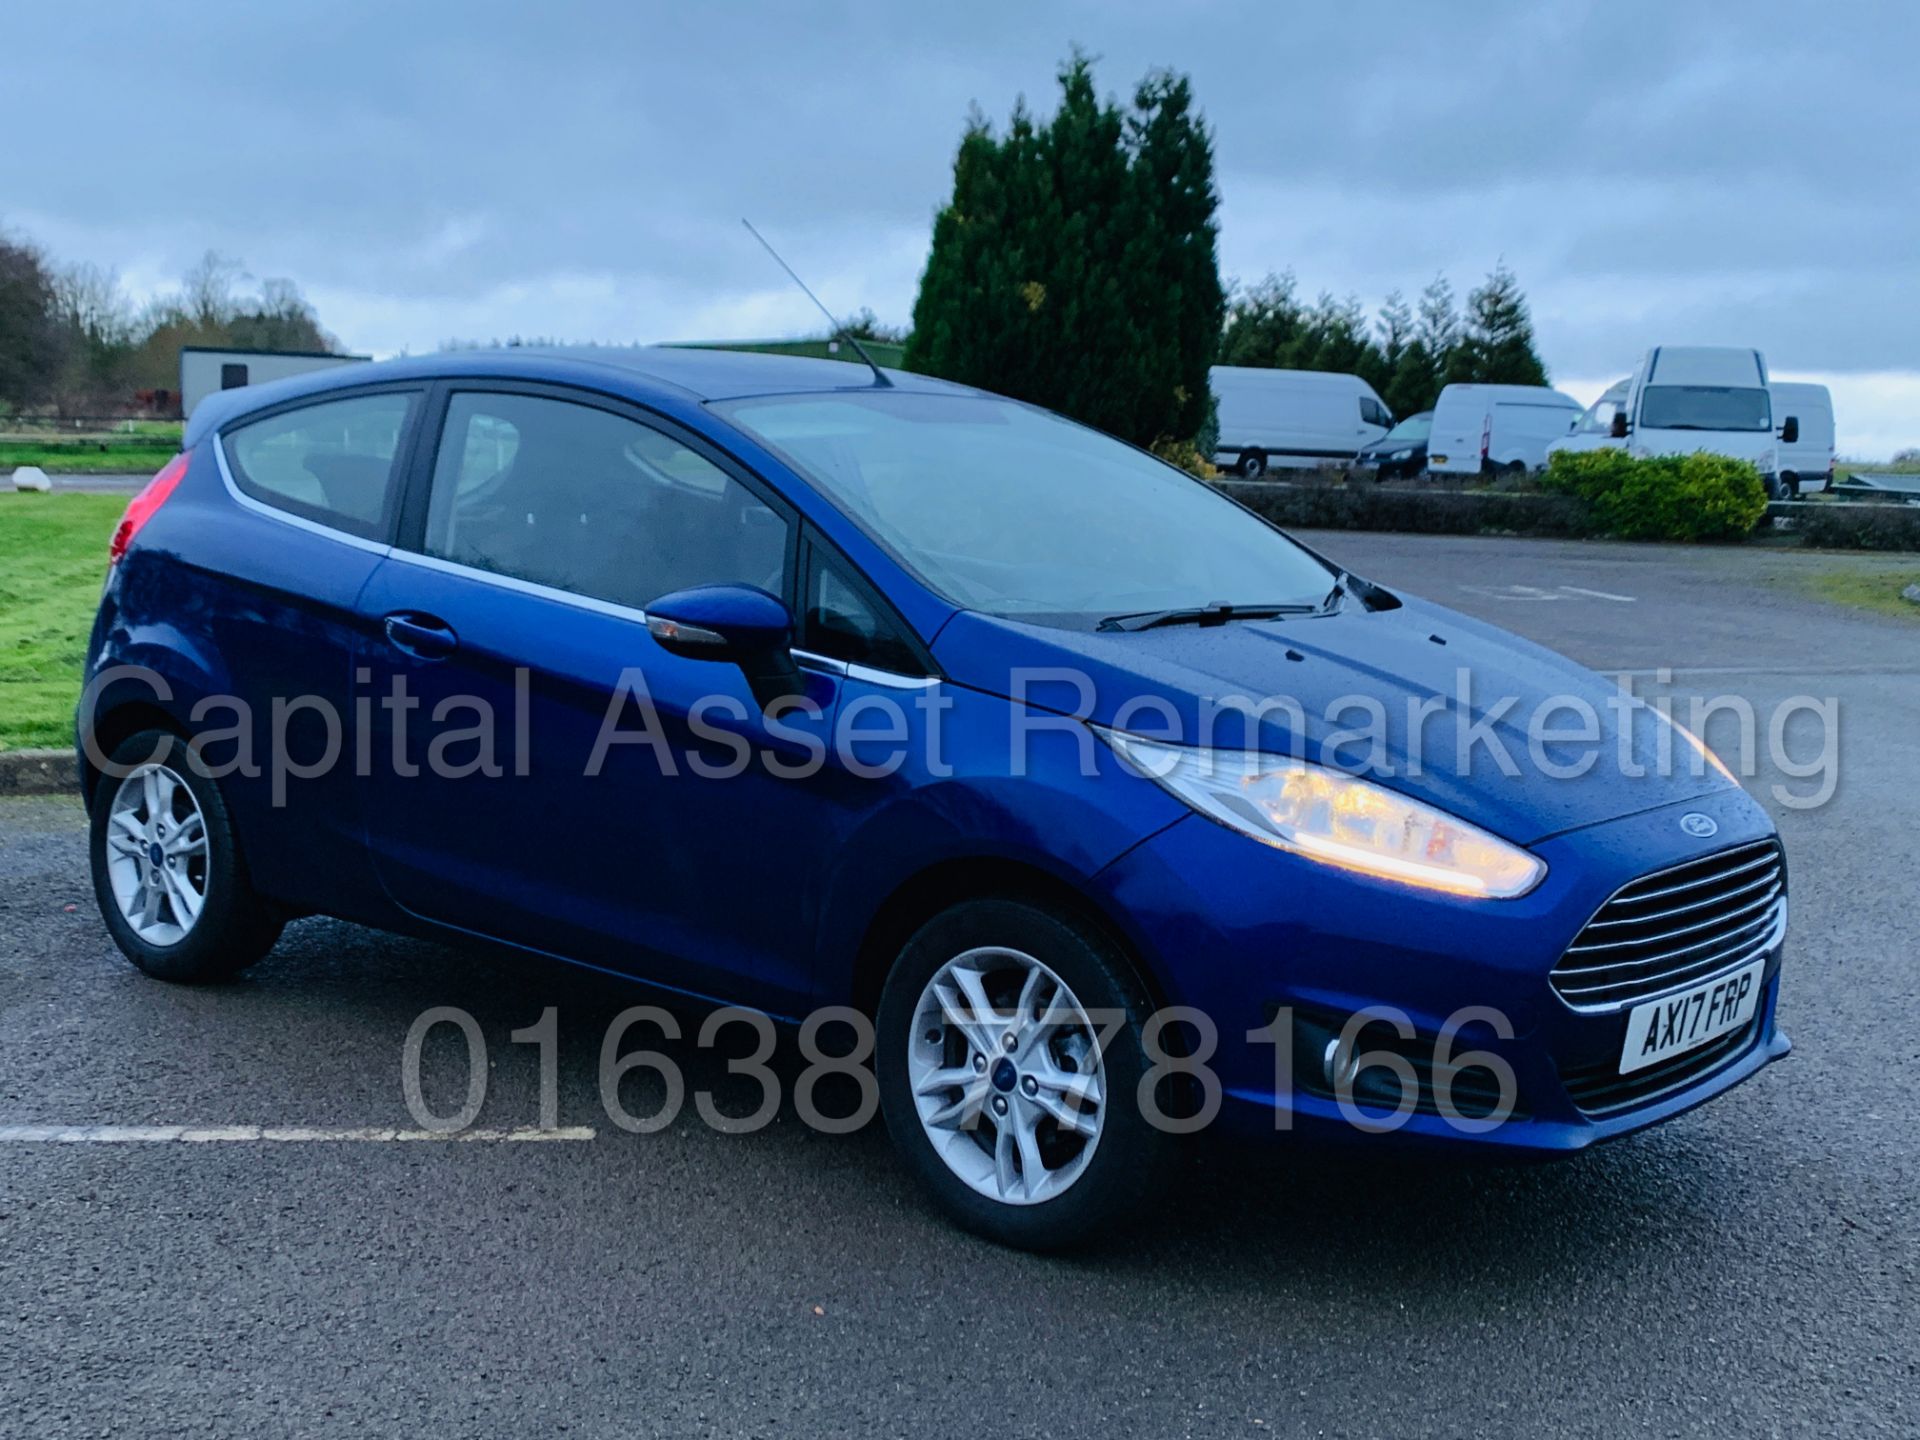 (On Sale) FORD FIESTA *ZETEC EDITION* (2017) '1.2 PETROL - 5 SPEED' *AIR CON & SAT NAV* 17,000 MILES - Image 10 of 40